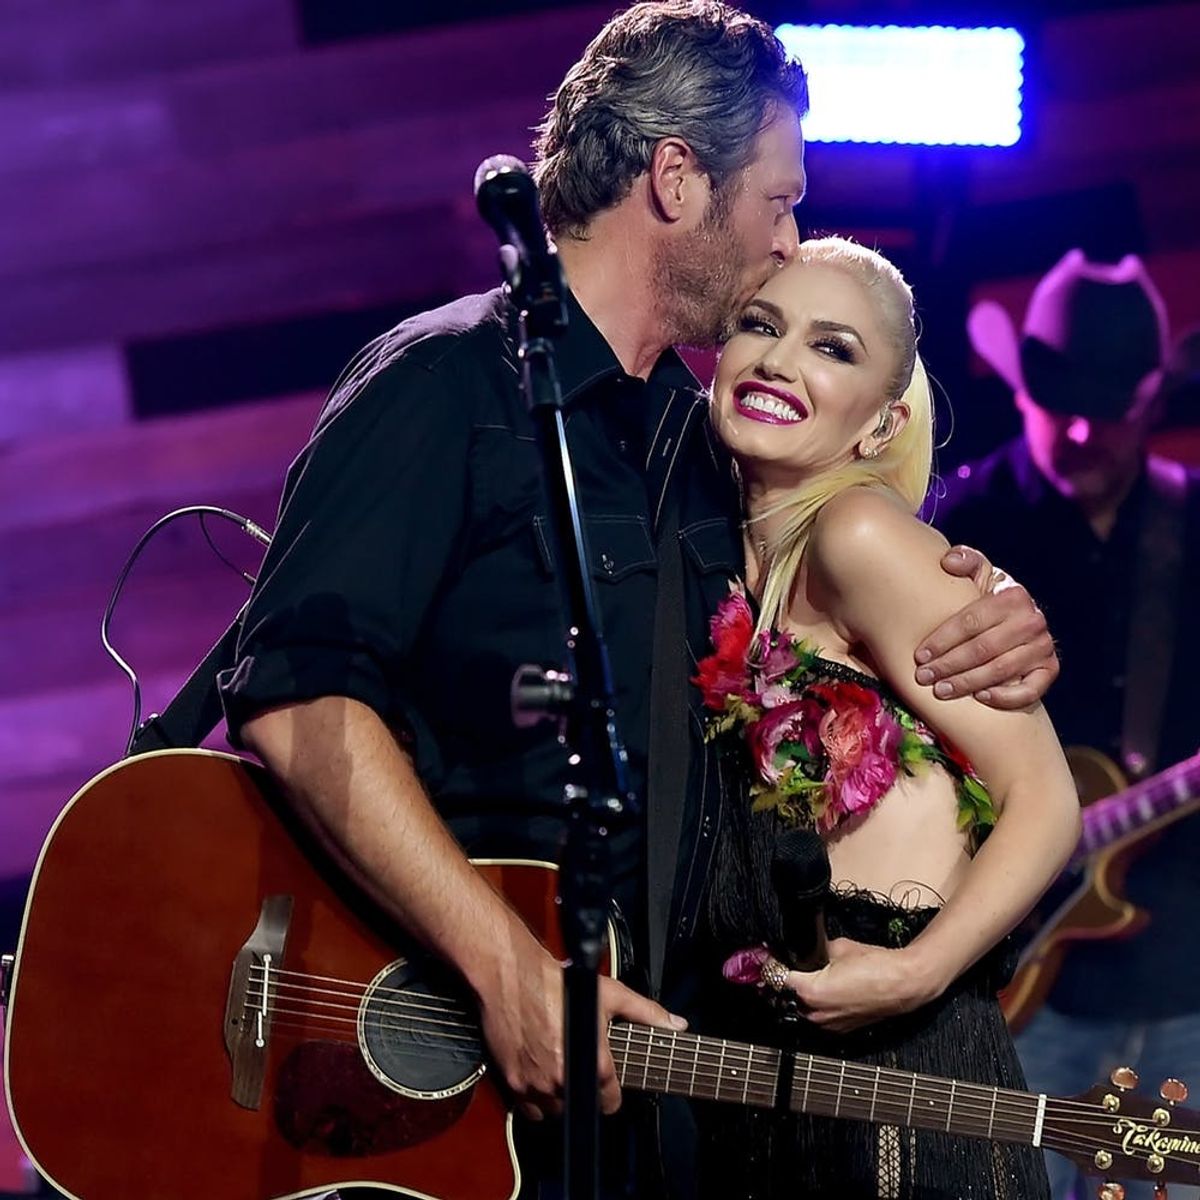 Gwen and Blake’s Super Cute Billboard Duet Makes Us Think There Might Be an Engagement on the Way